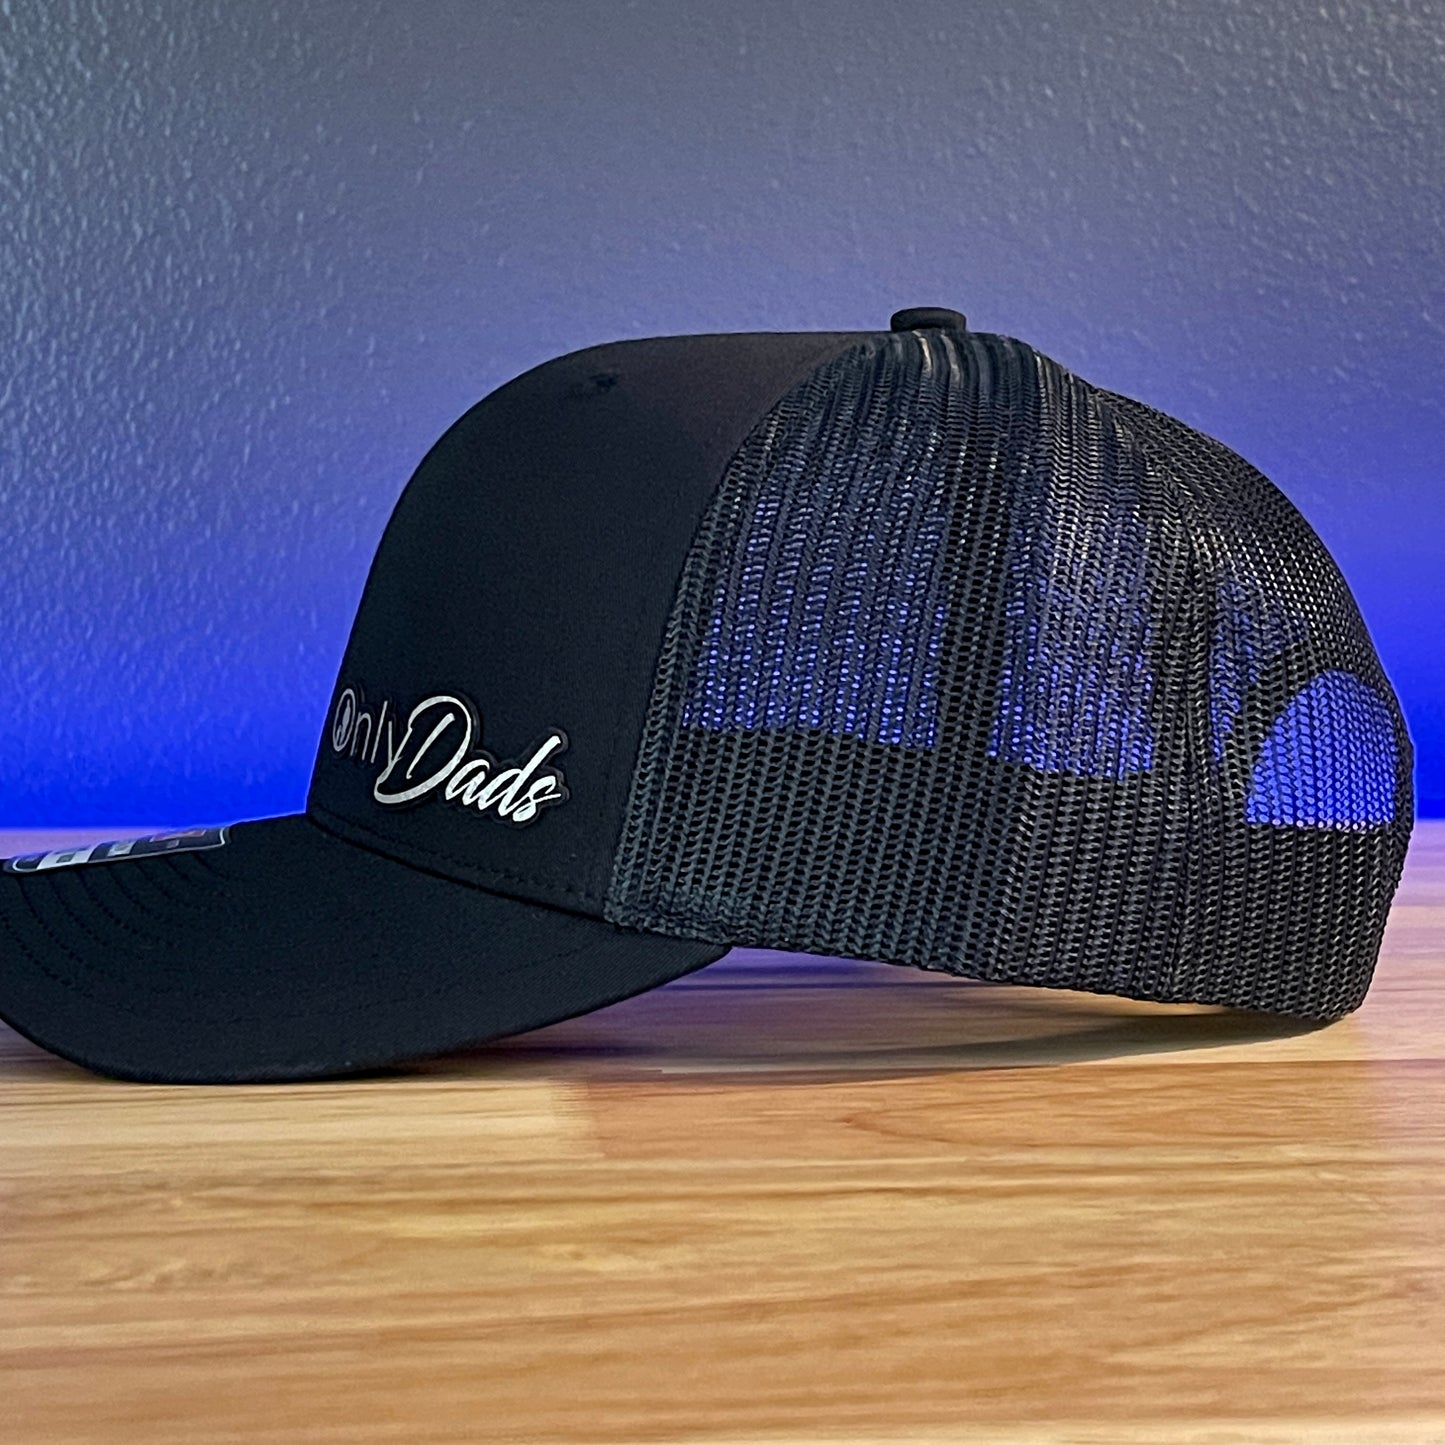 Only Dads Funny Leather Patch Hat Black/Black